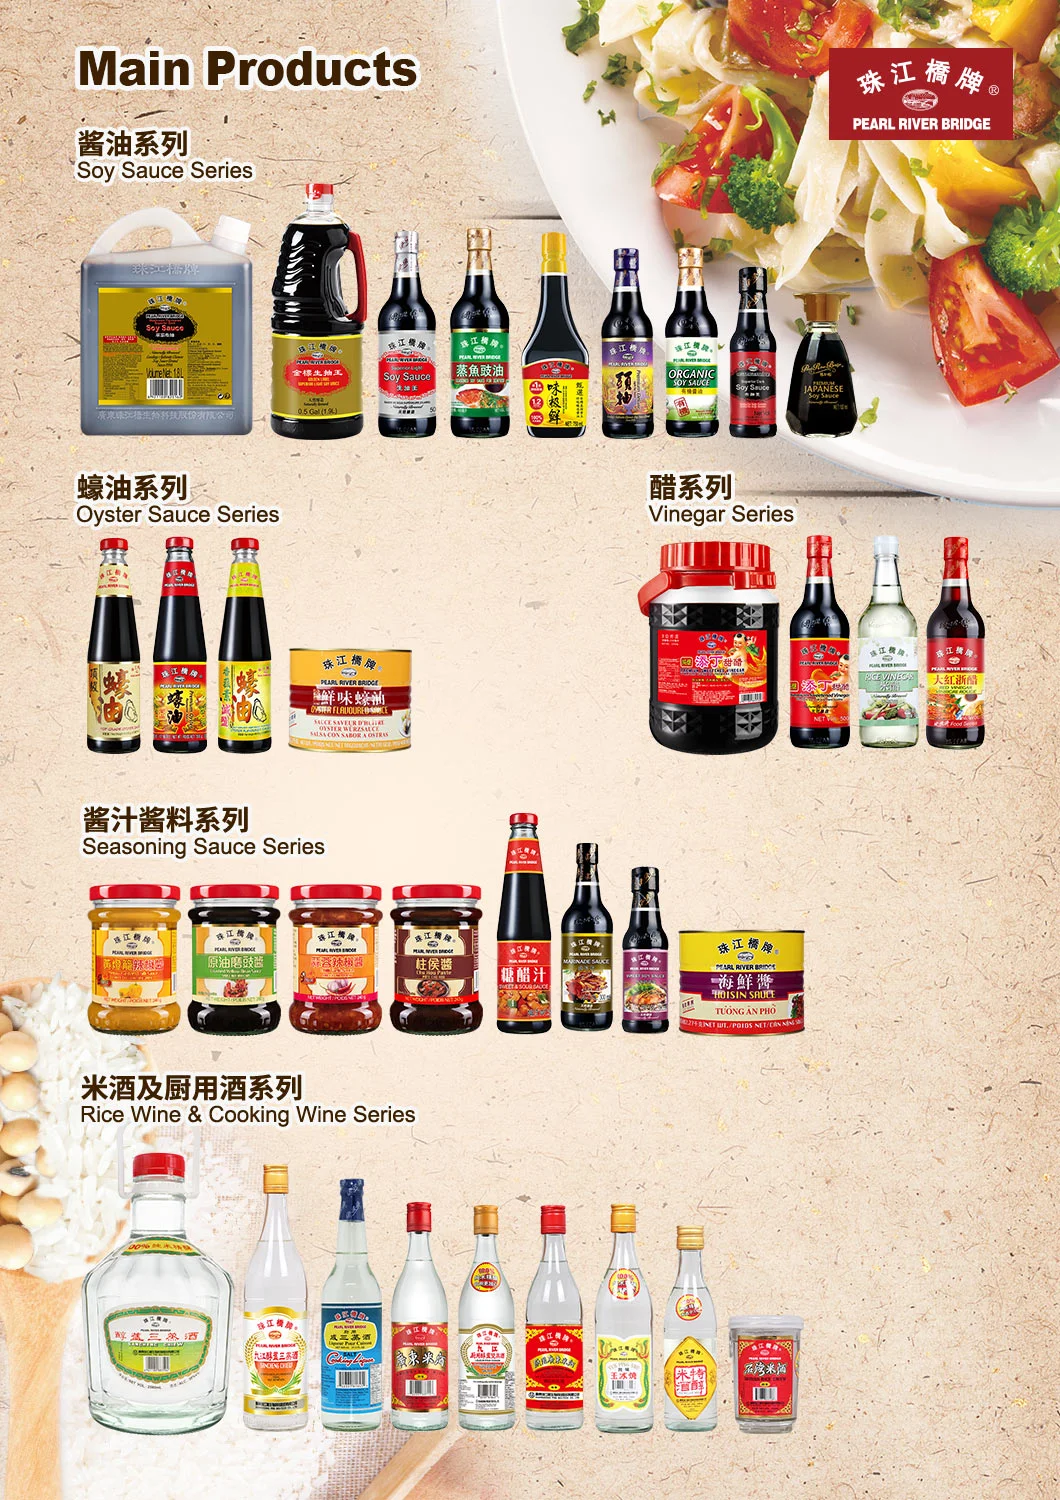 Pearl River Bridge (the Leading Soy Sauce Brand) Delicious Dark Soy Sauce 150ml for Cooking Food